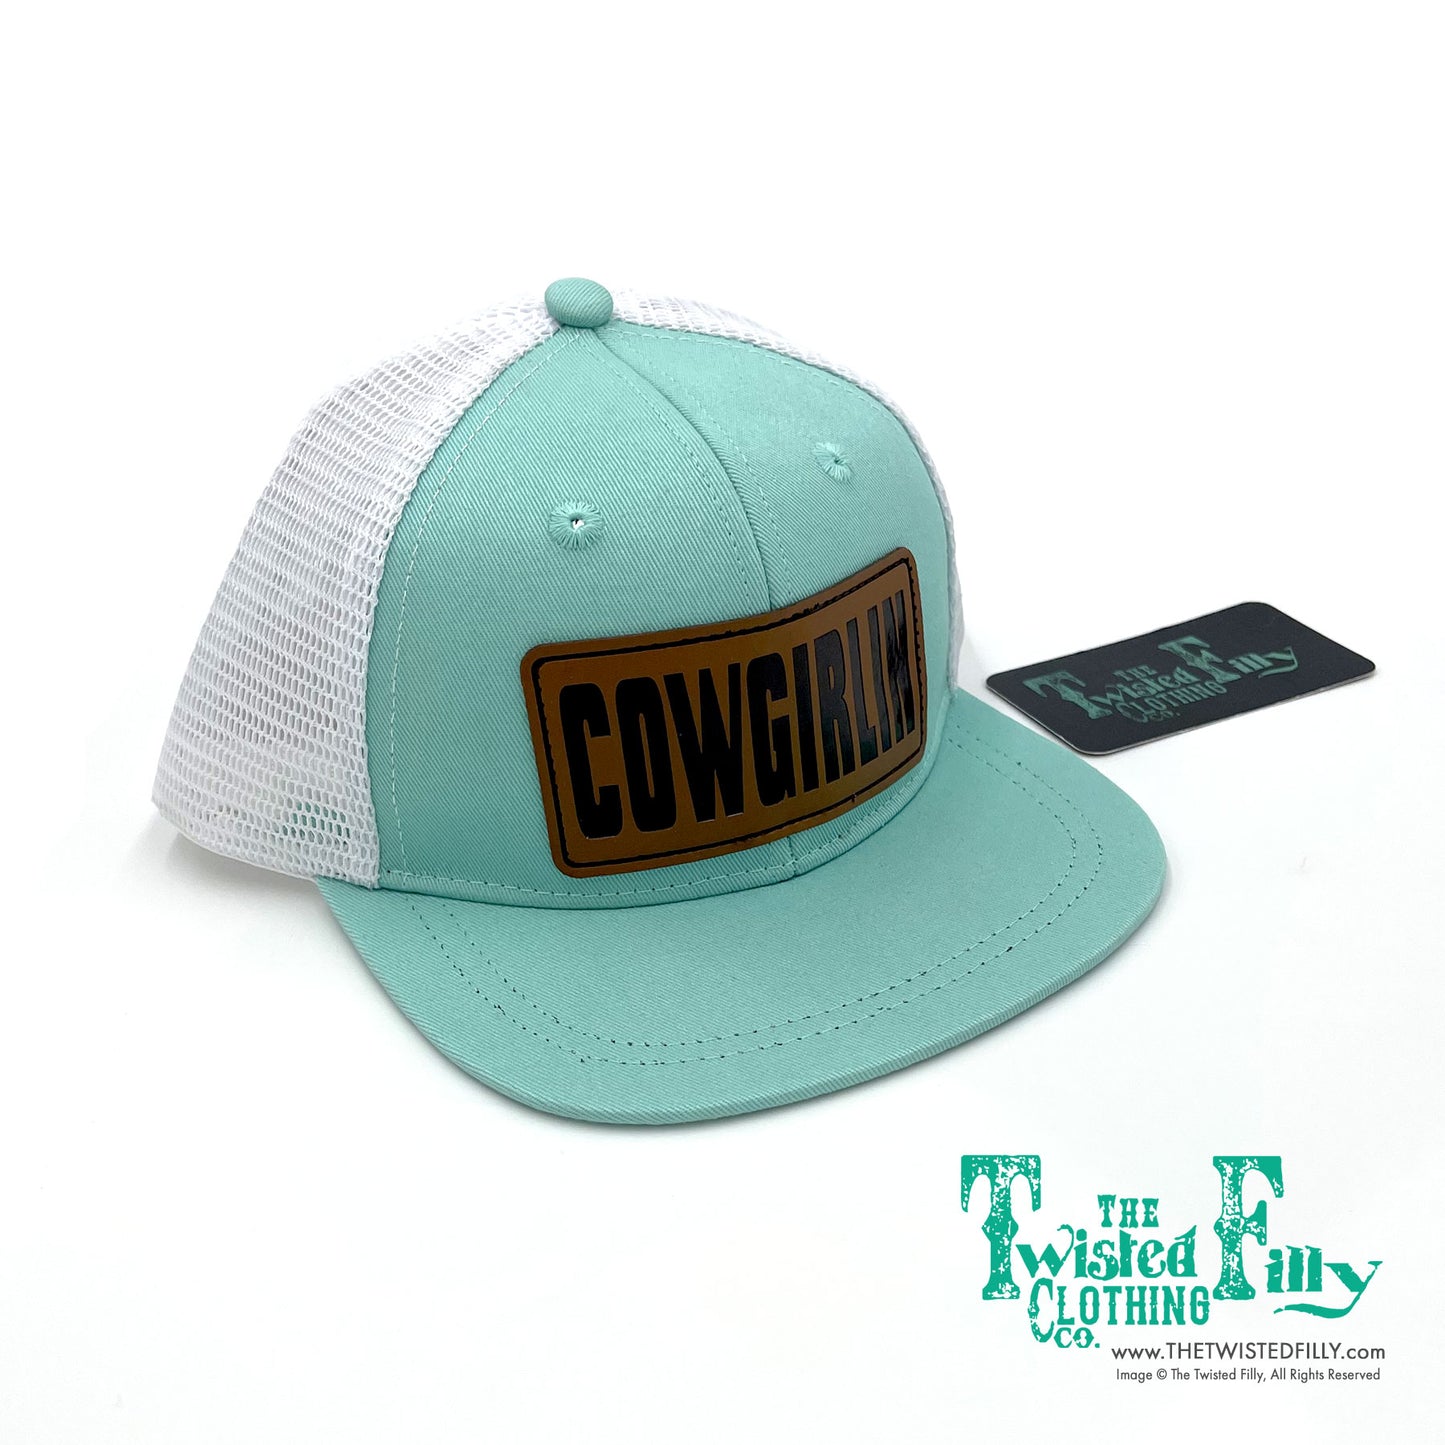 Cowgirlin Leather Patch - Infant / Toddler Trucker Hat - Turquoise/White